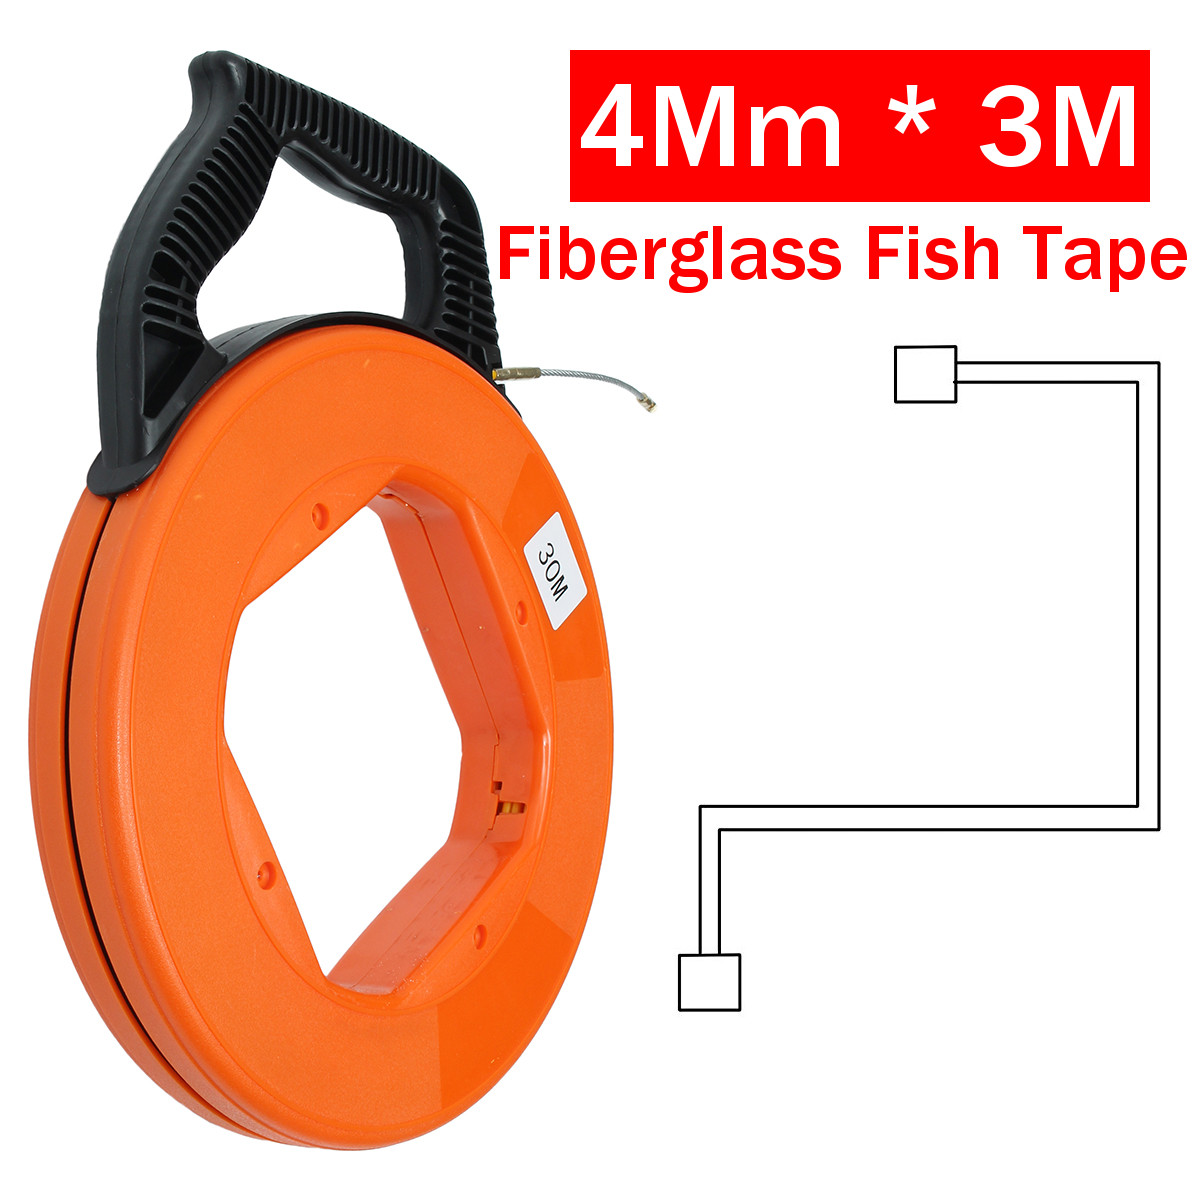 30M-Fiberglass-Fish-Tape-For-Pulling-Wire-and-Cable-1242224-2